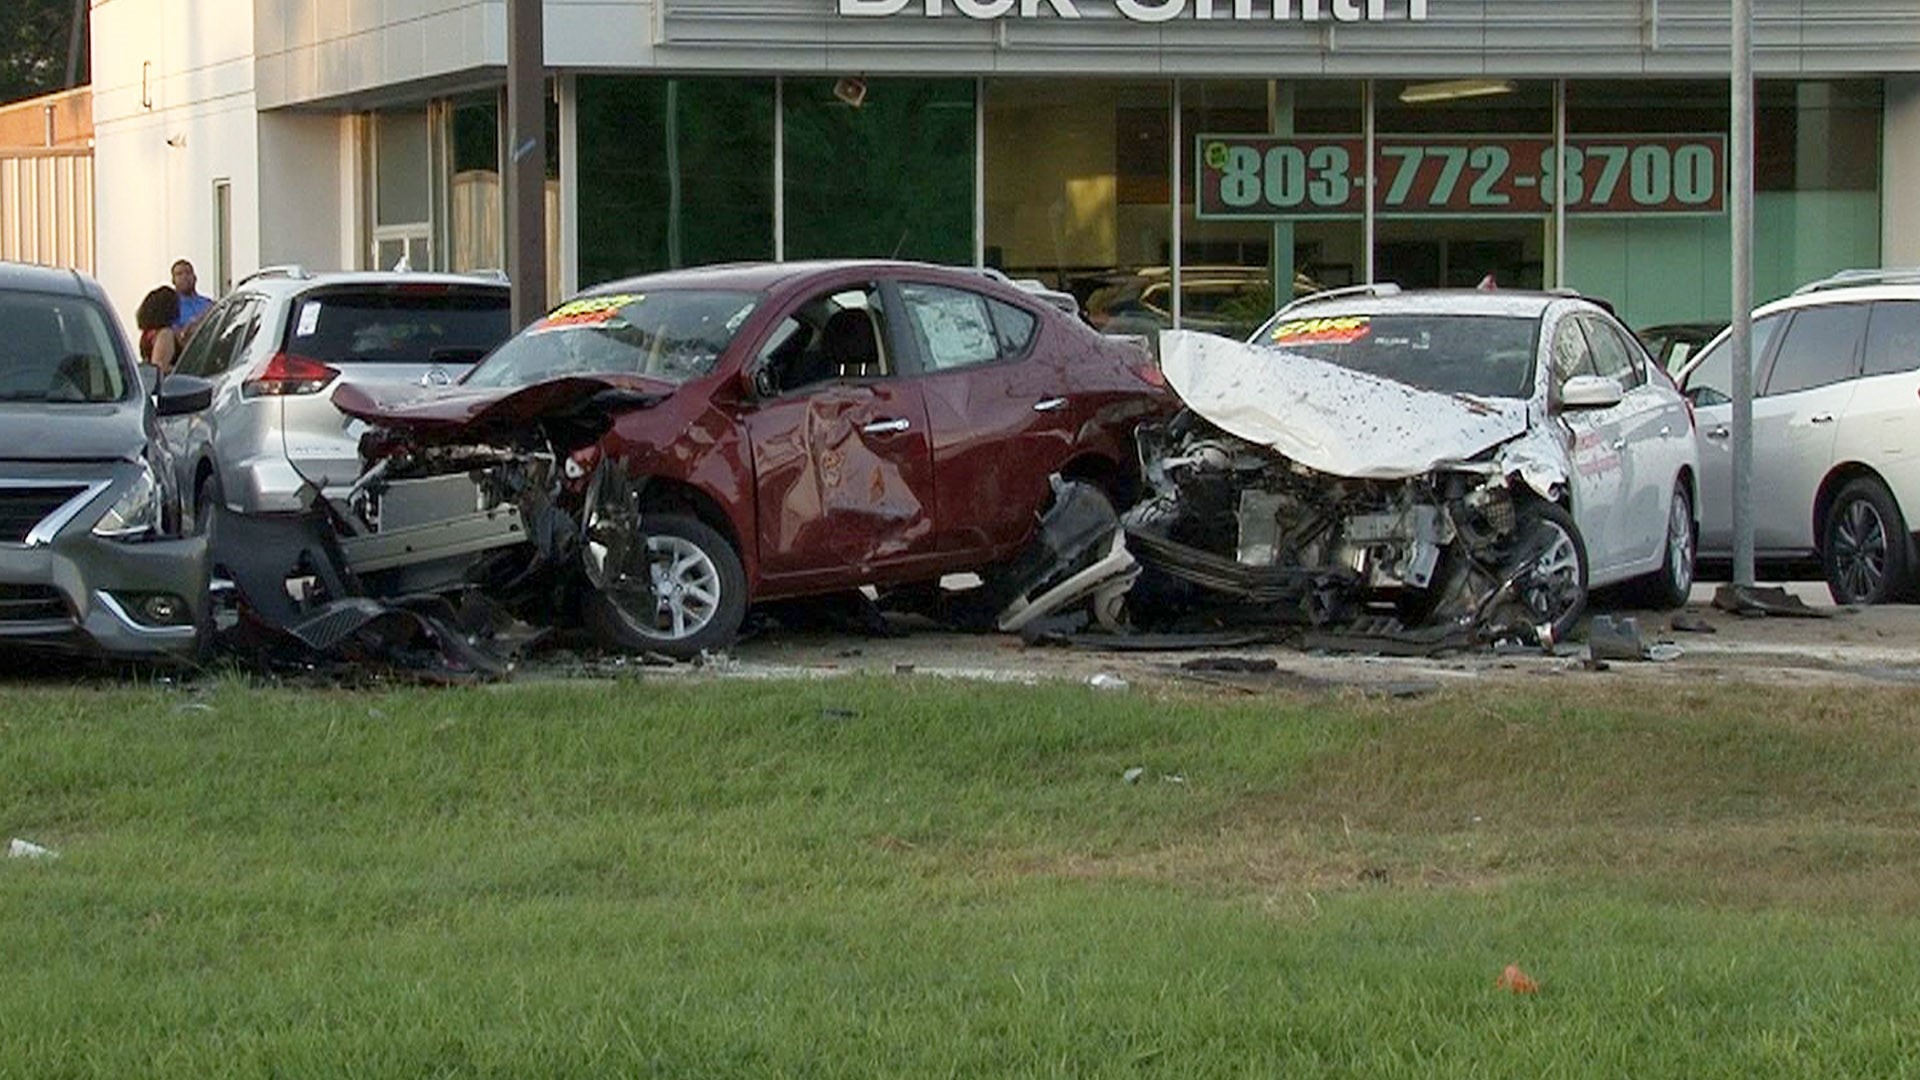 A car ran off the road and crashed into a Columbia car dealership, damaging several vehicles in the process.